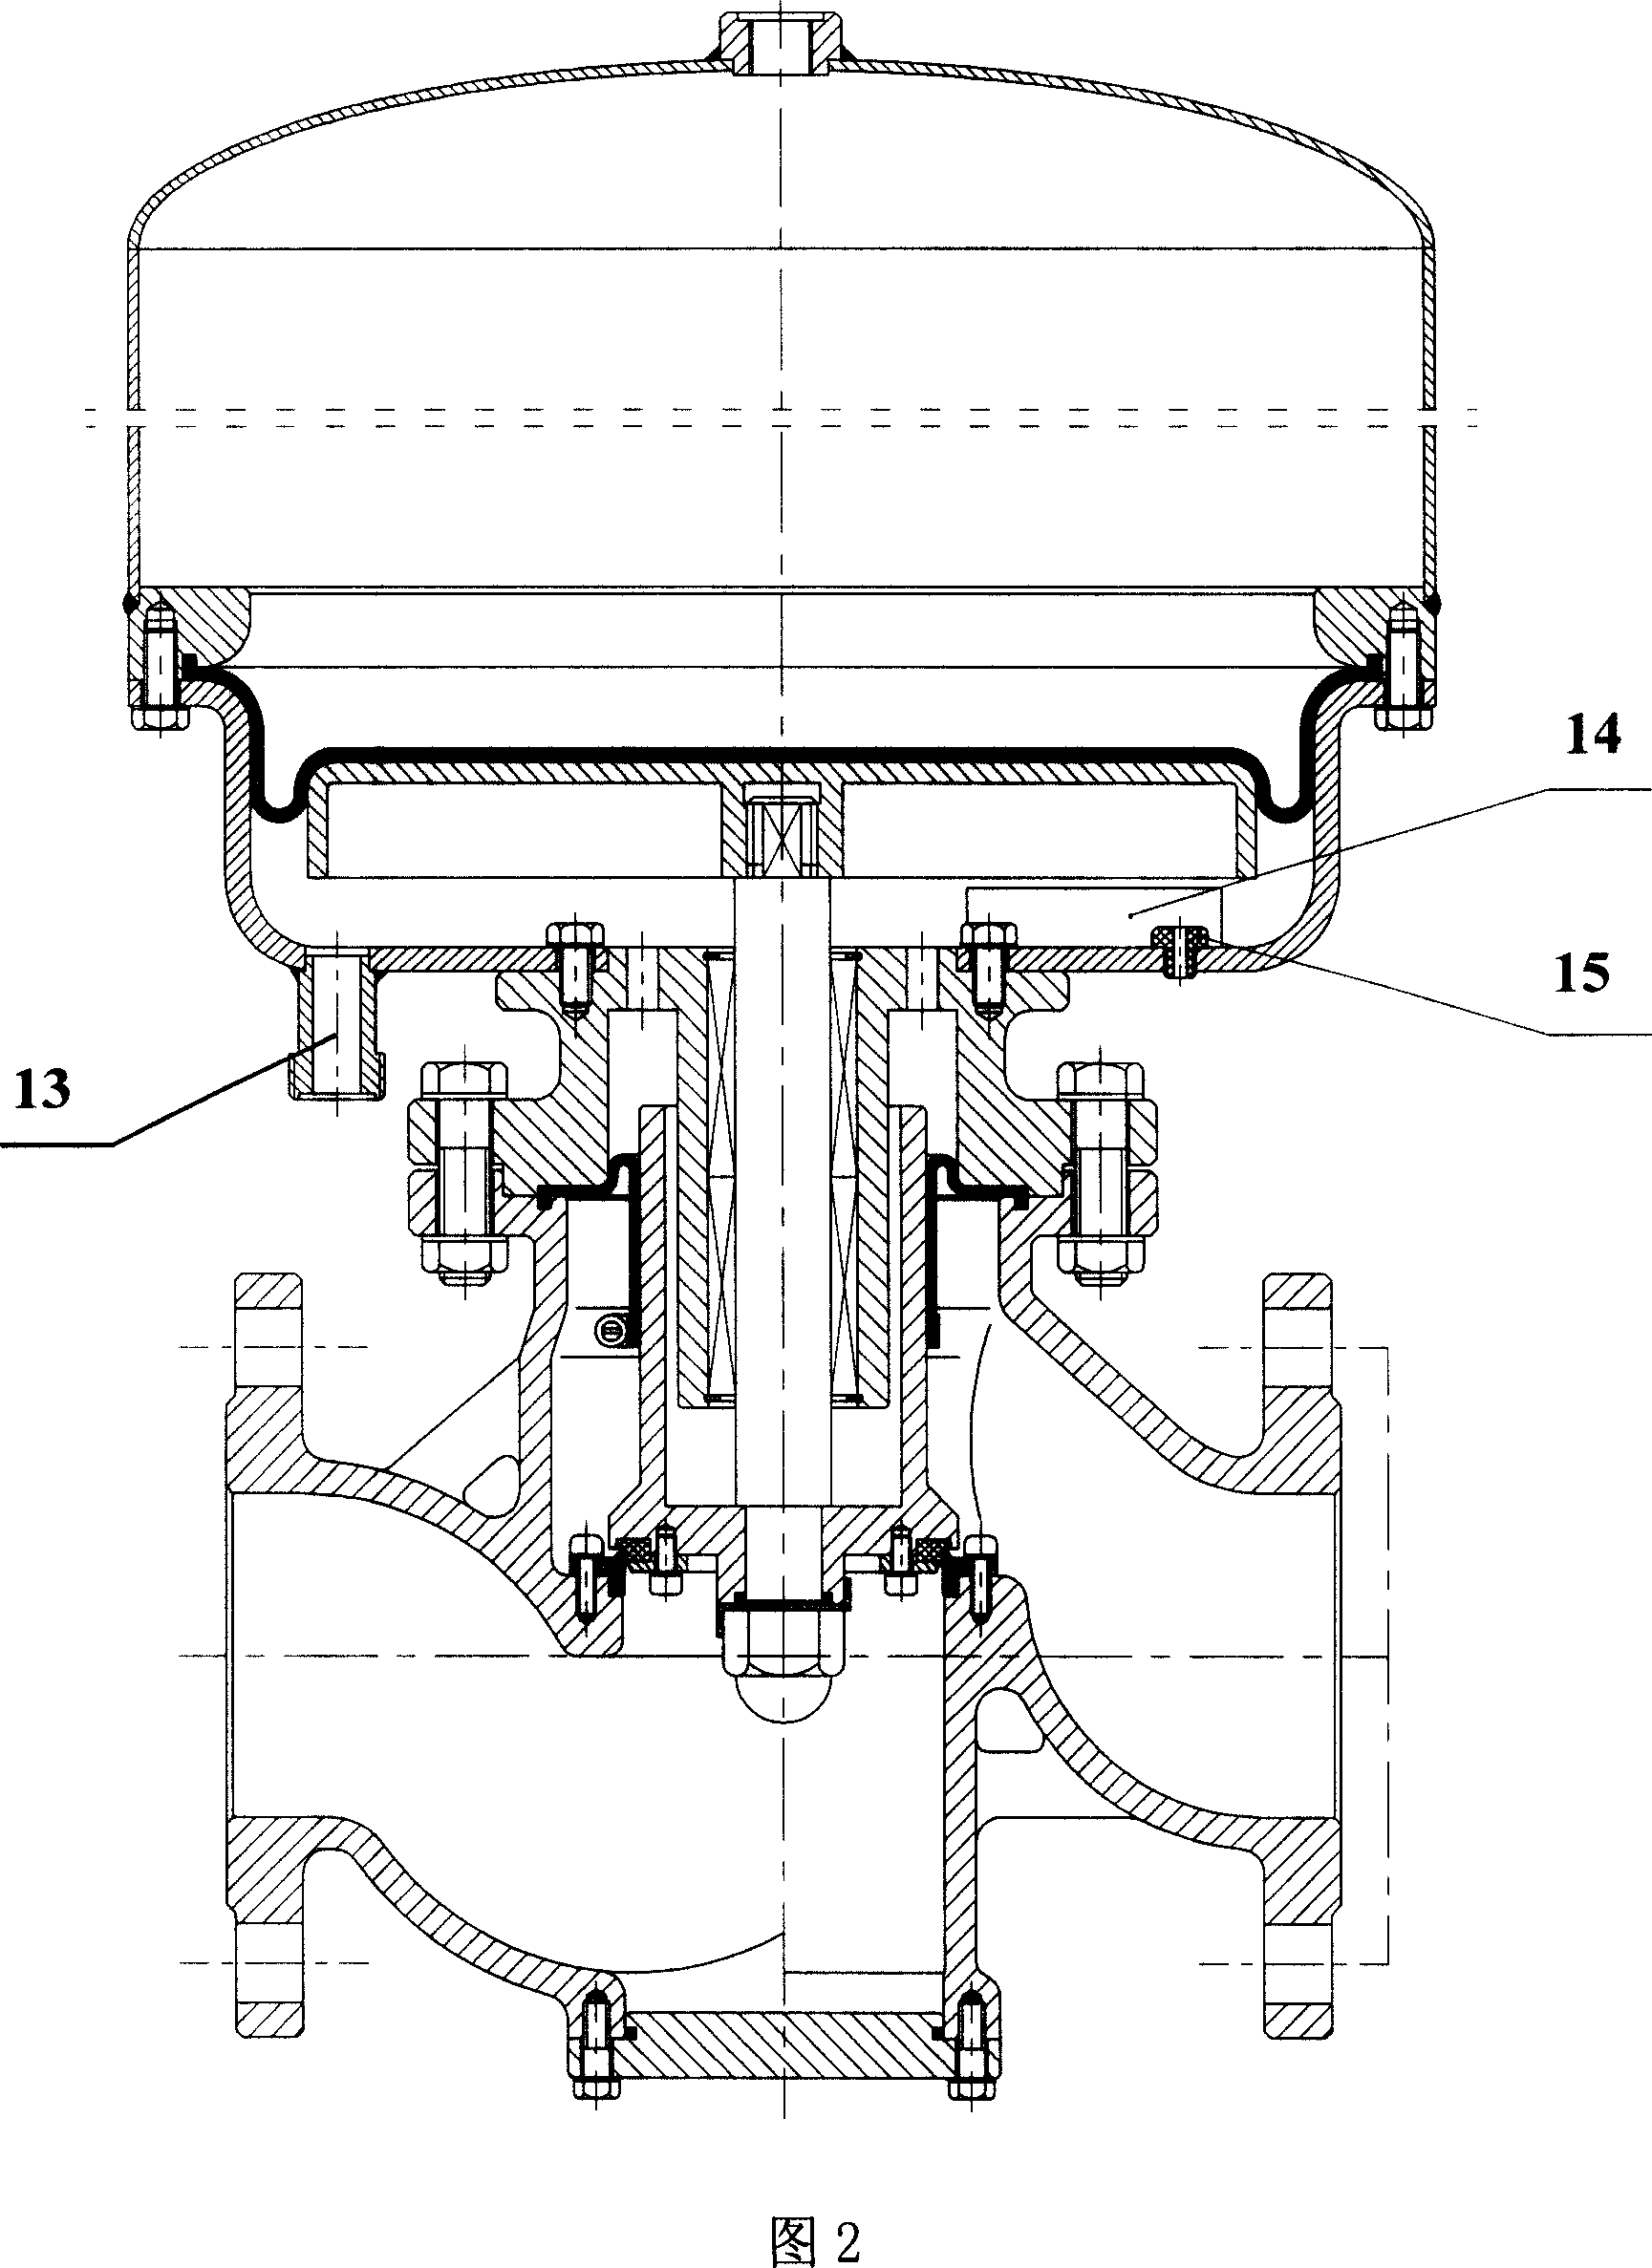 Mixing delivery over-flow valve